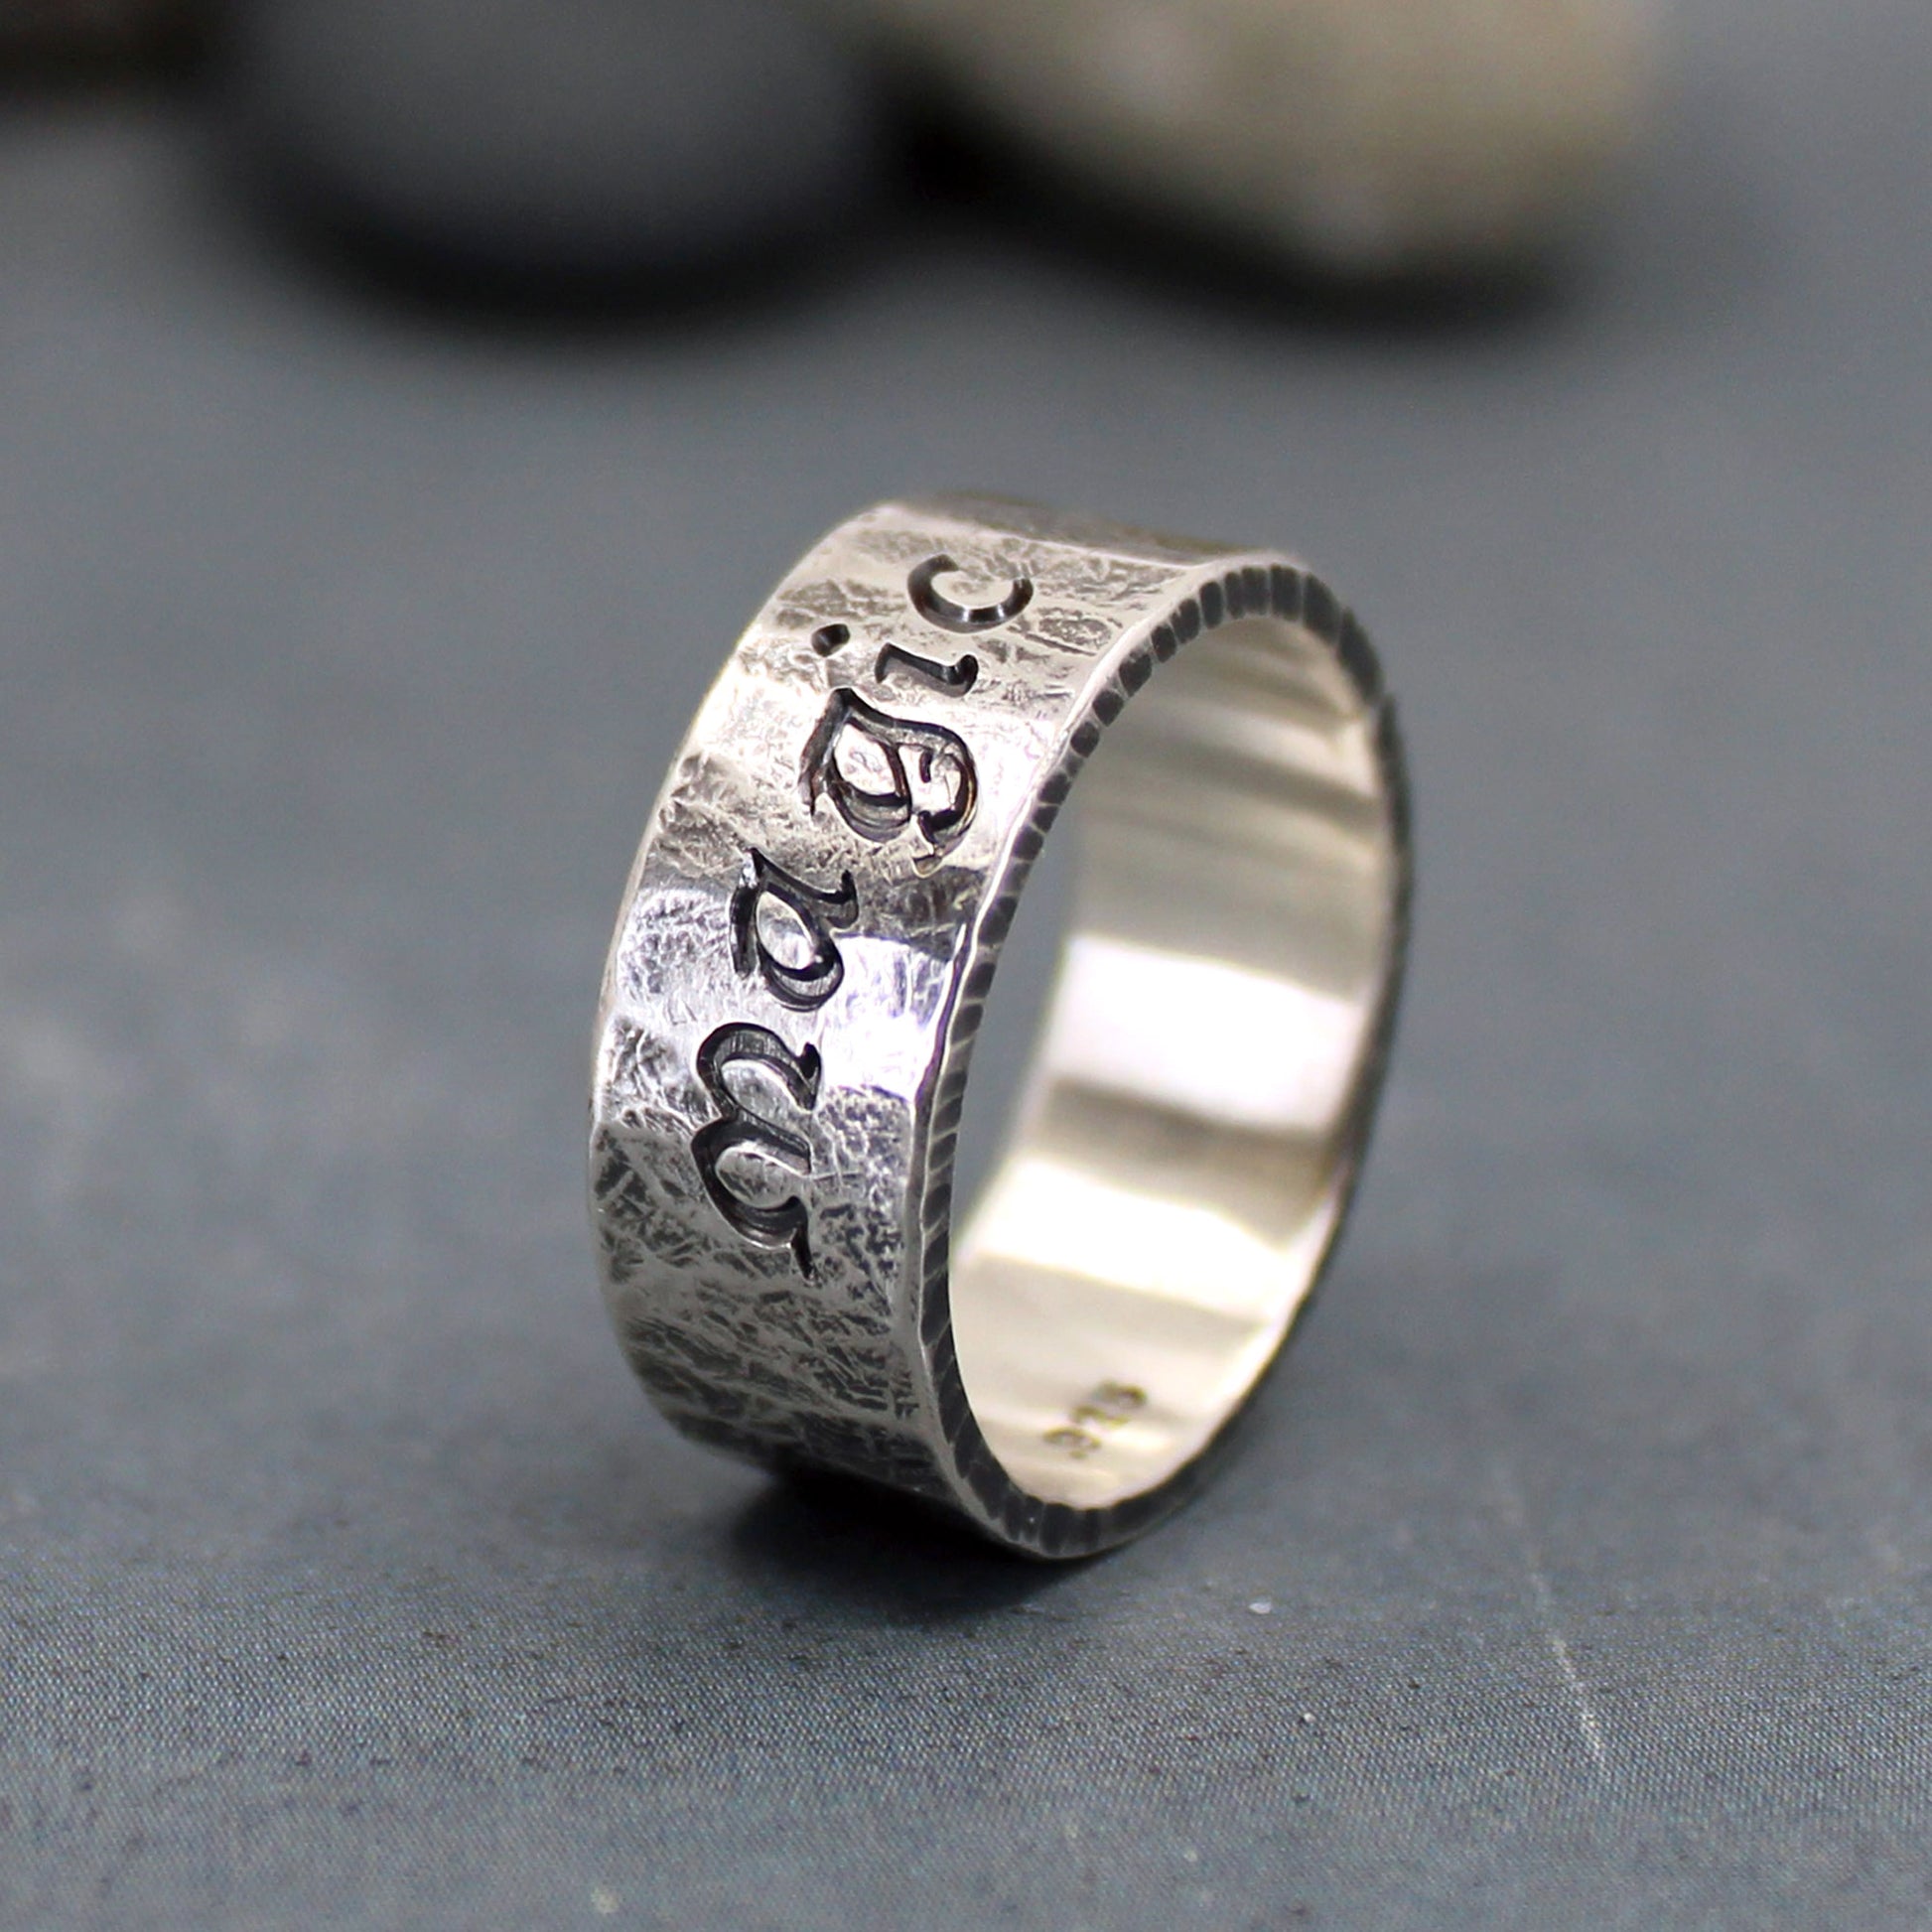 Magic inscribed on rustic silver ring